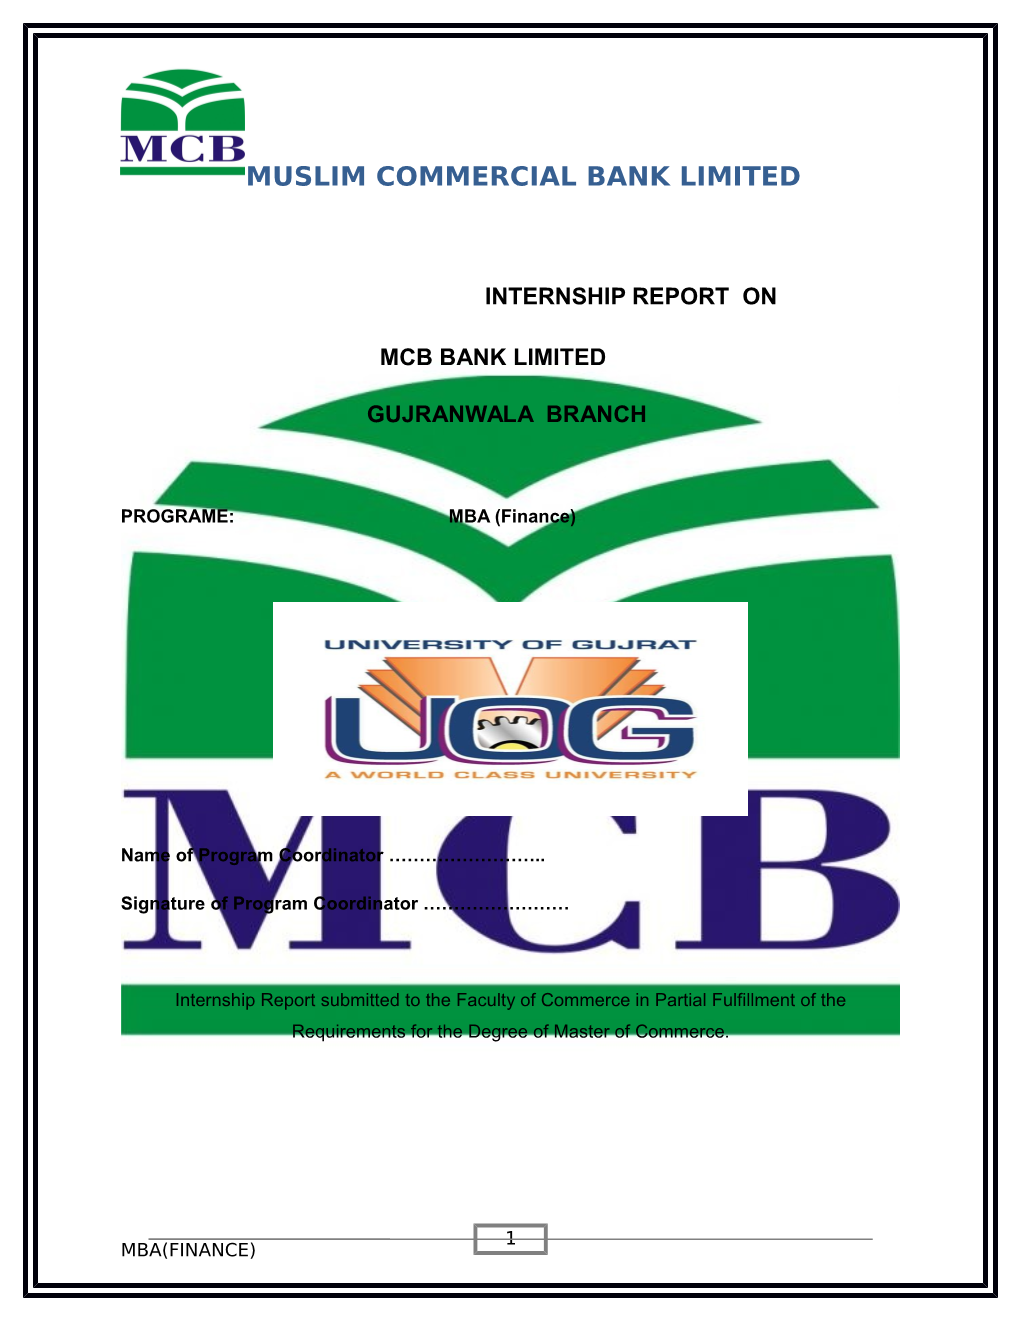 Muslim Commercial Bank Limited